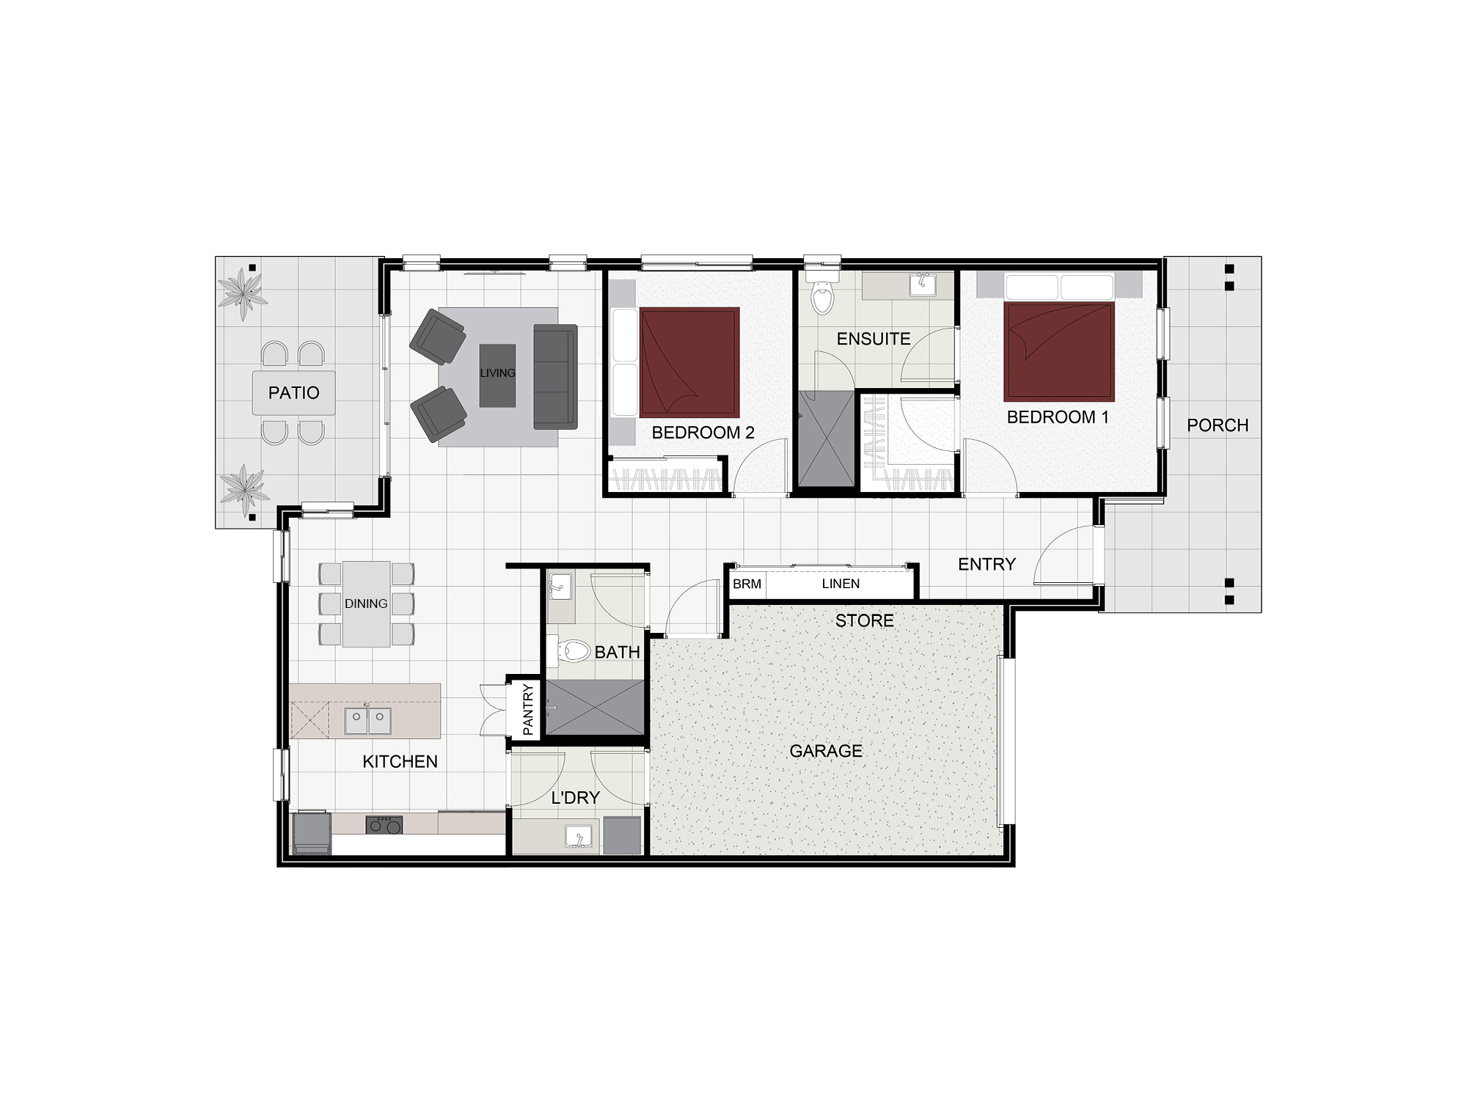 Floorplan of the Allora house design with a Gable facade located at Stockland Halcyon Rise, Logan Reserve.